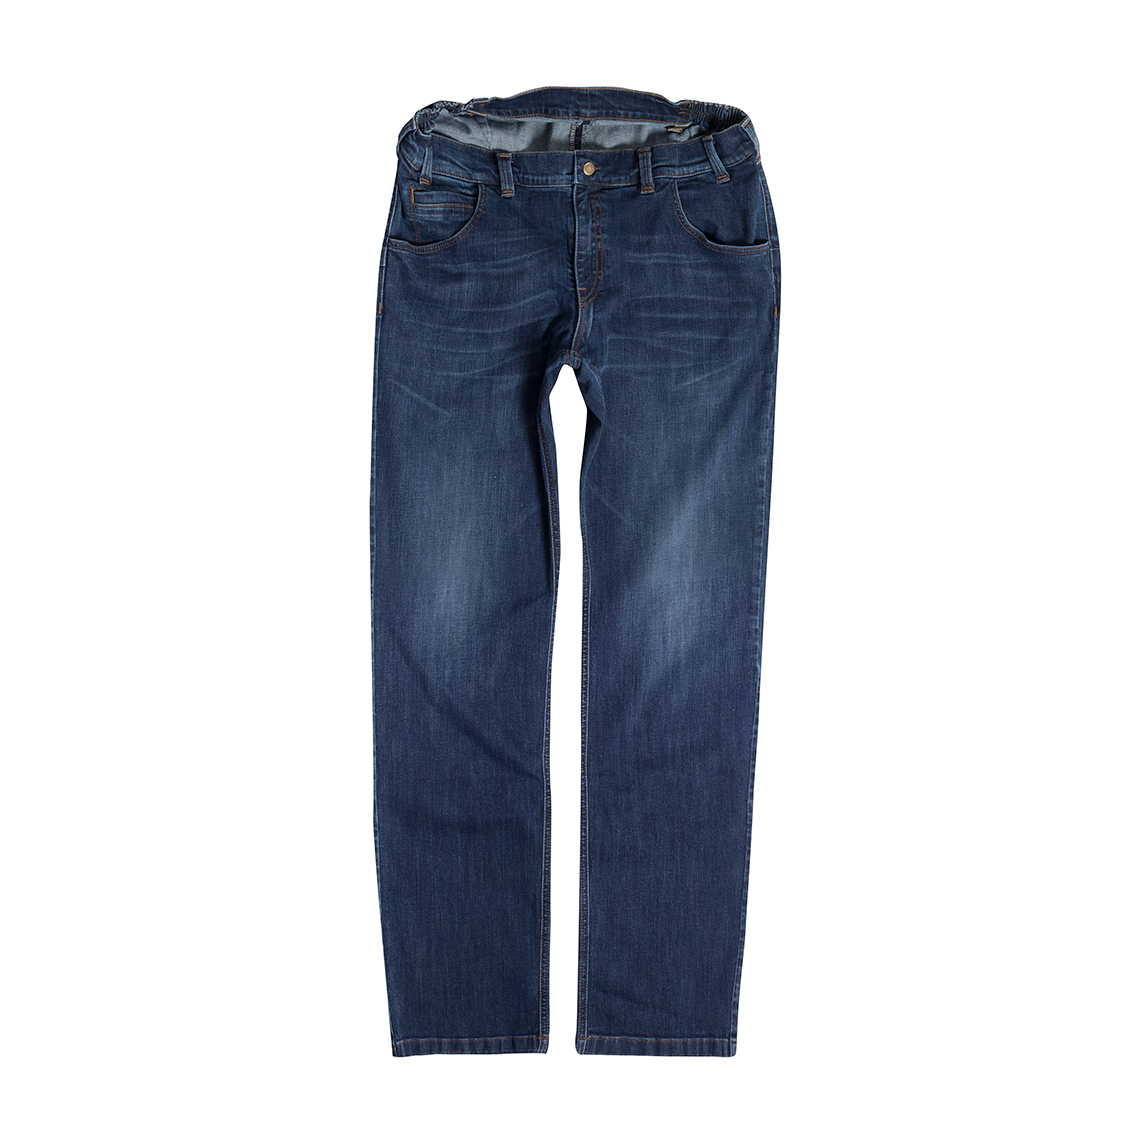 Men's  Jeans  Fashion washed, blue MIKE 10391 46